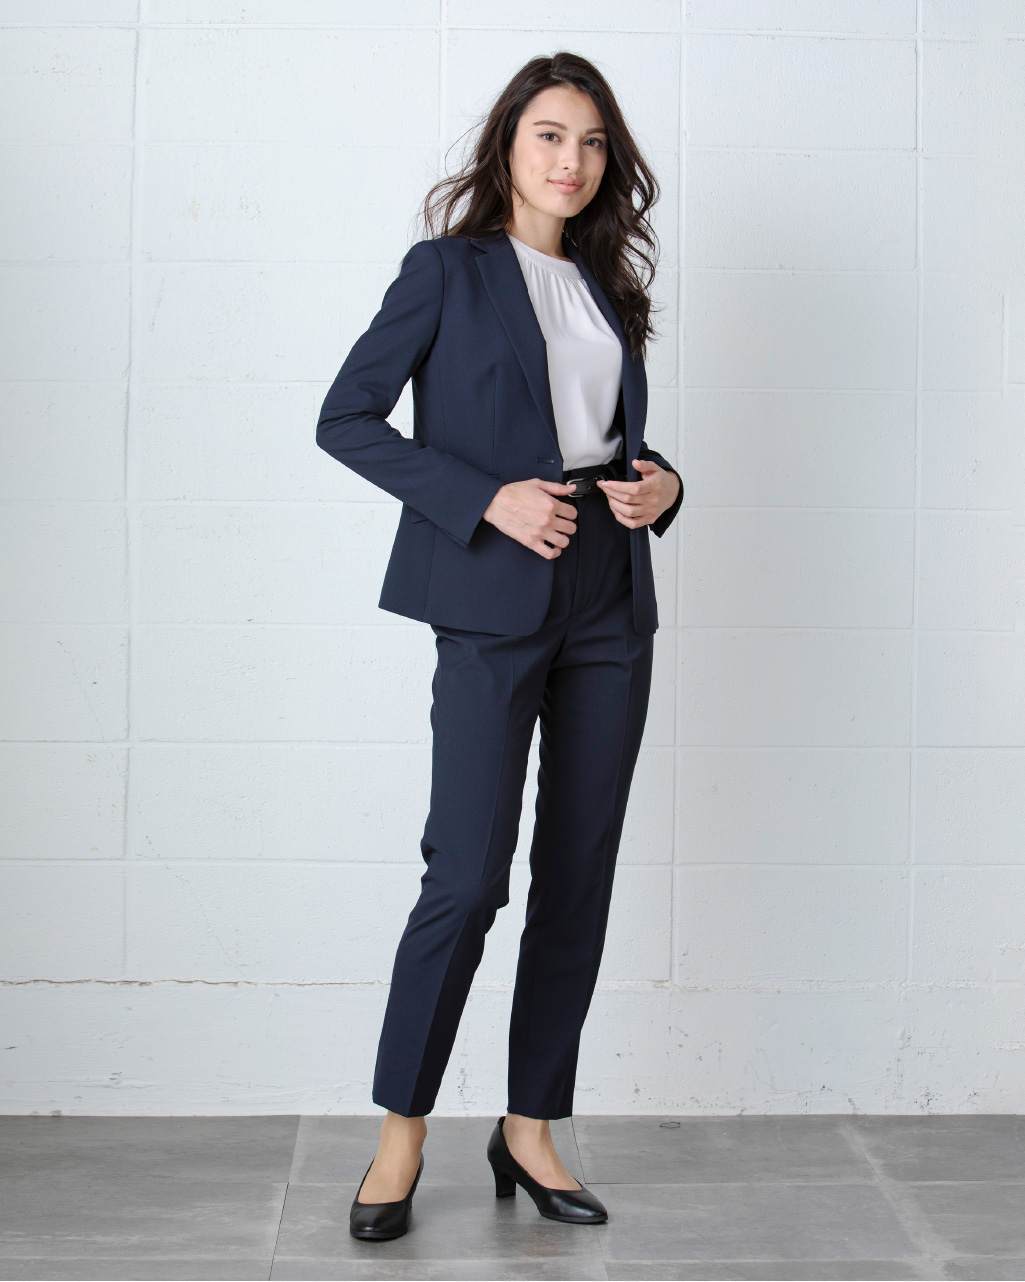 NAVY SUIT STYLE